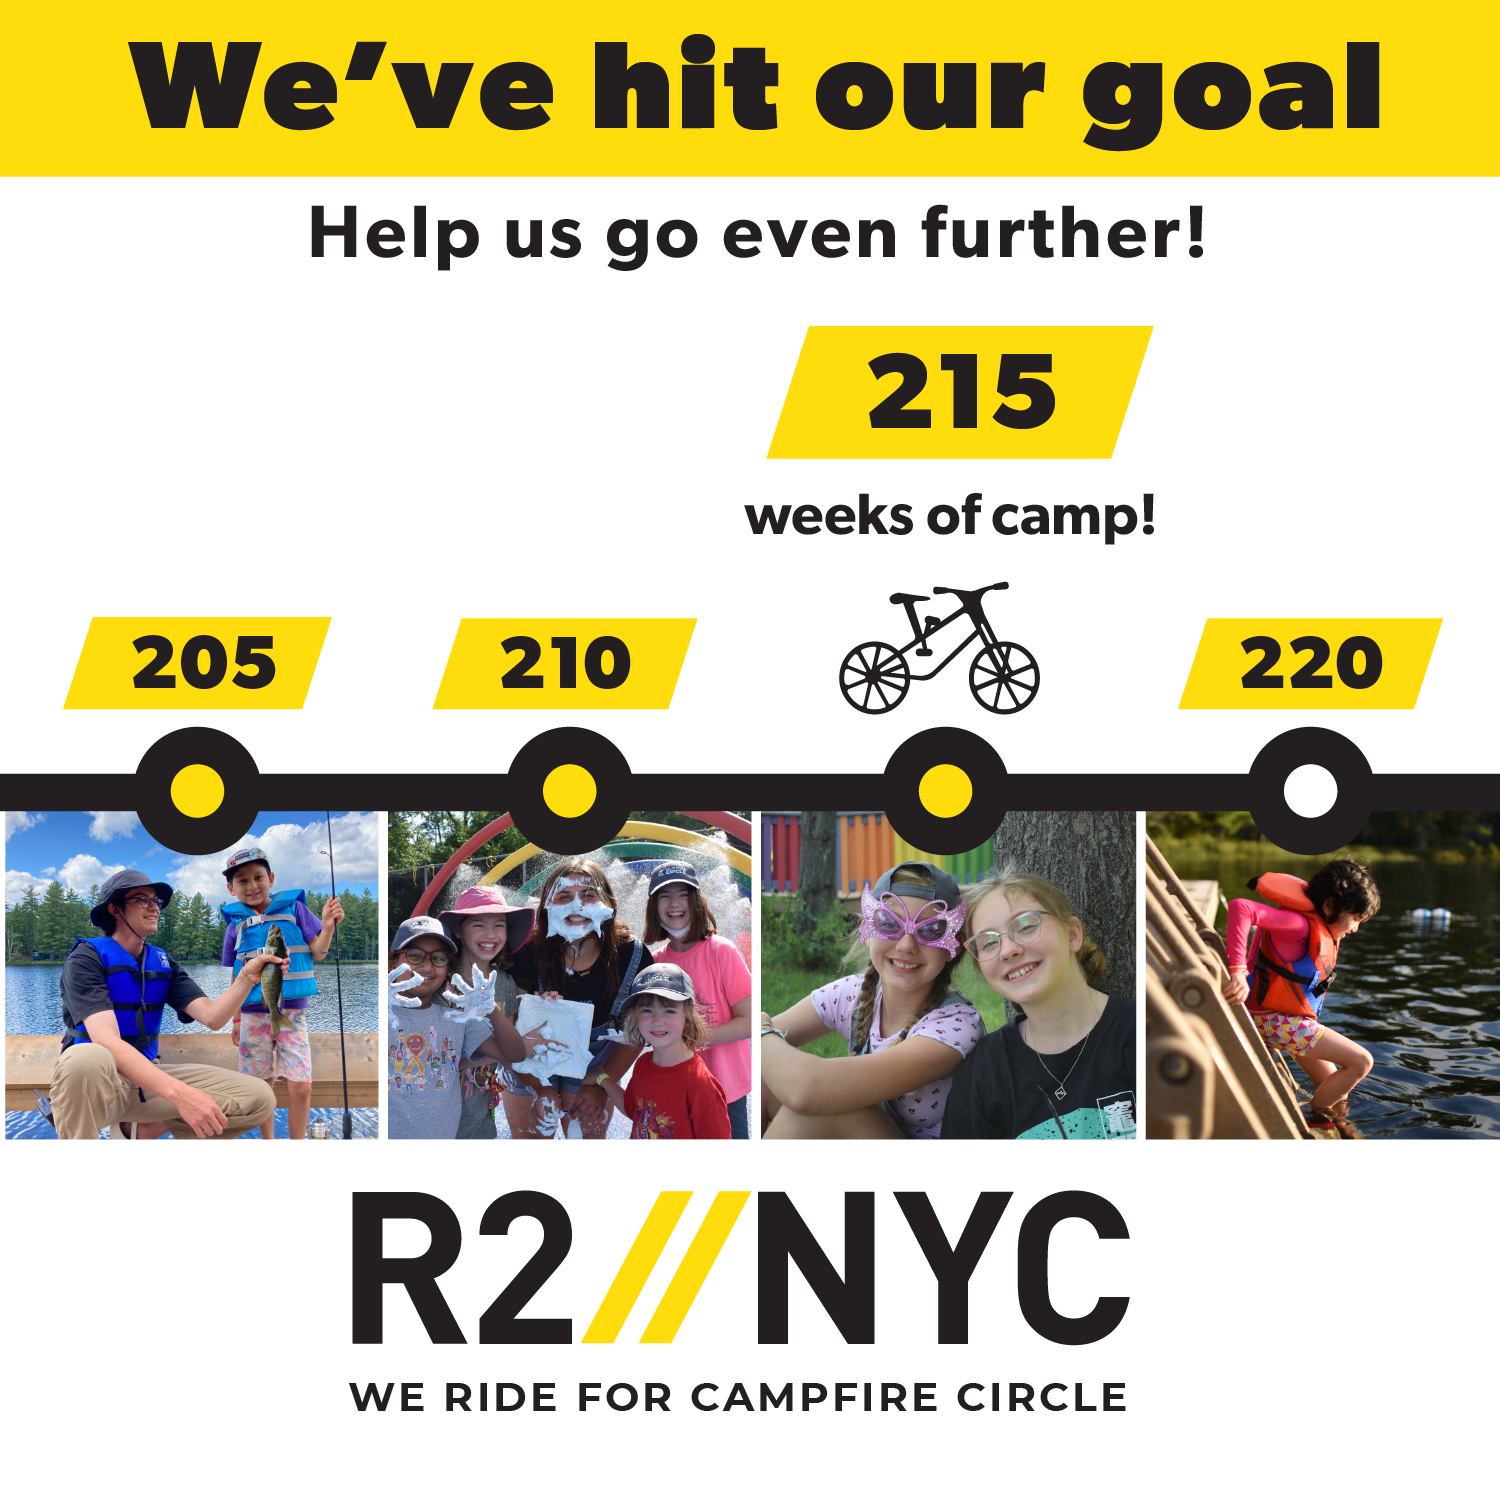 R2NYC We ride for Campfire Circle. We have raised enough funds to provide 215 weeks of camp